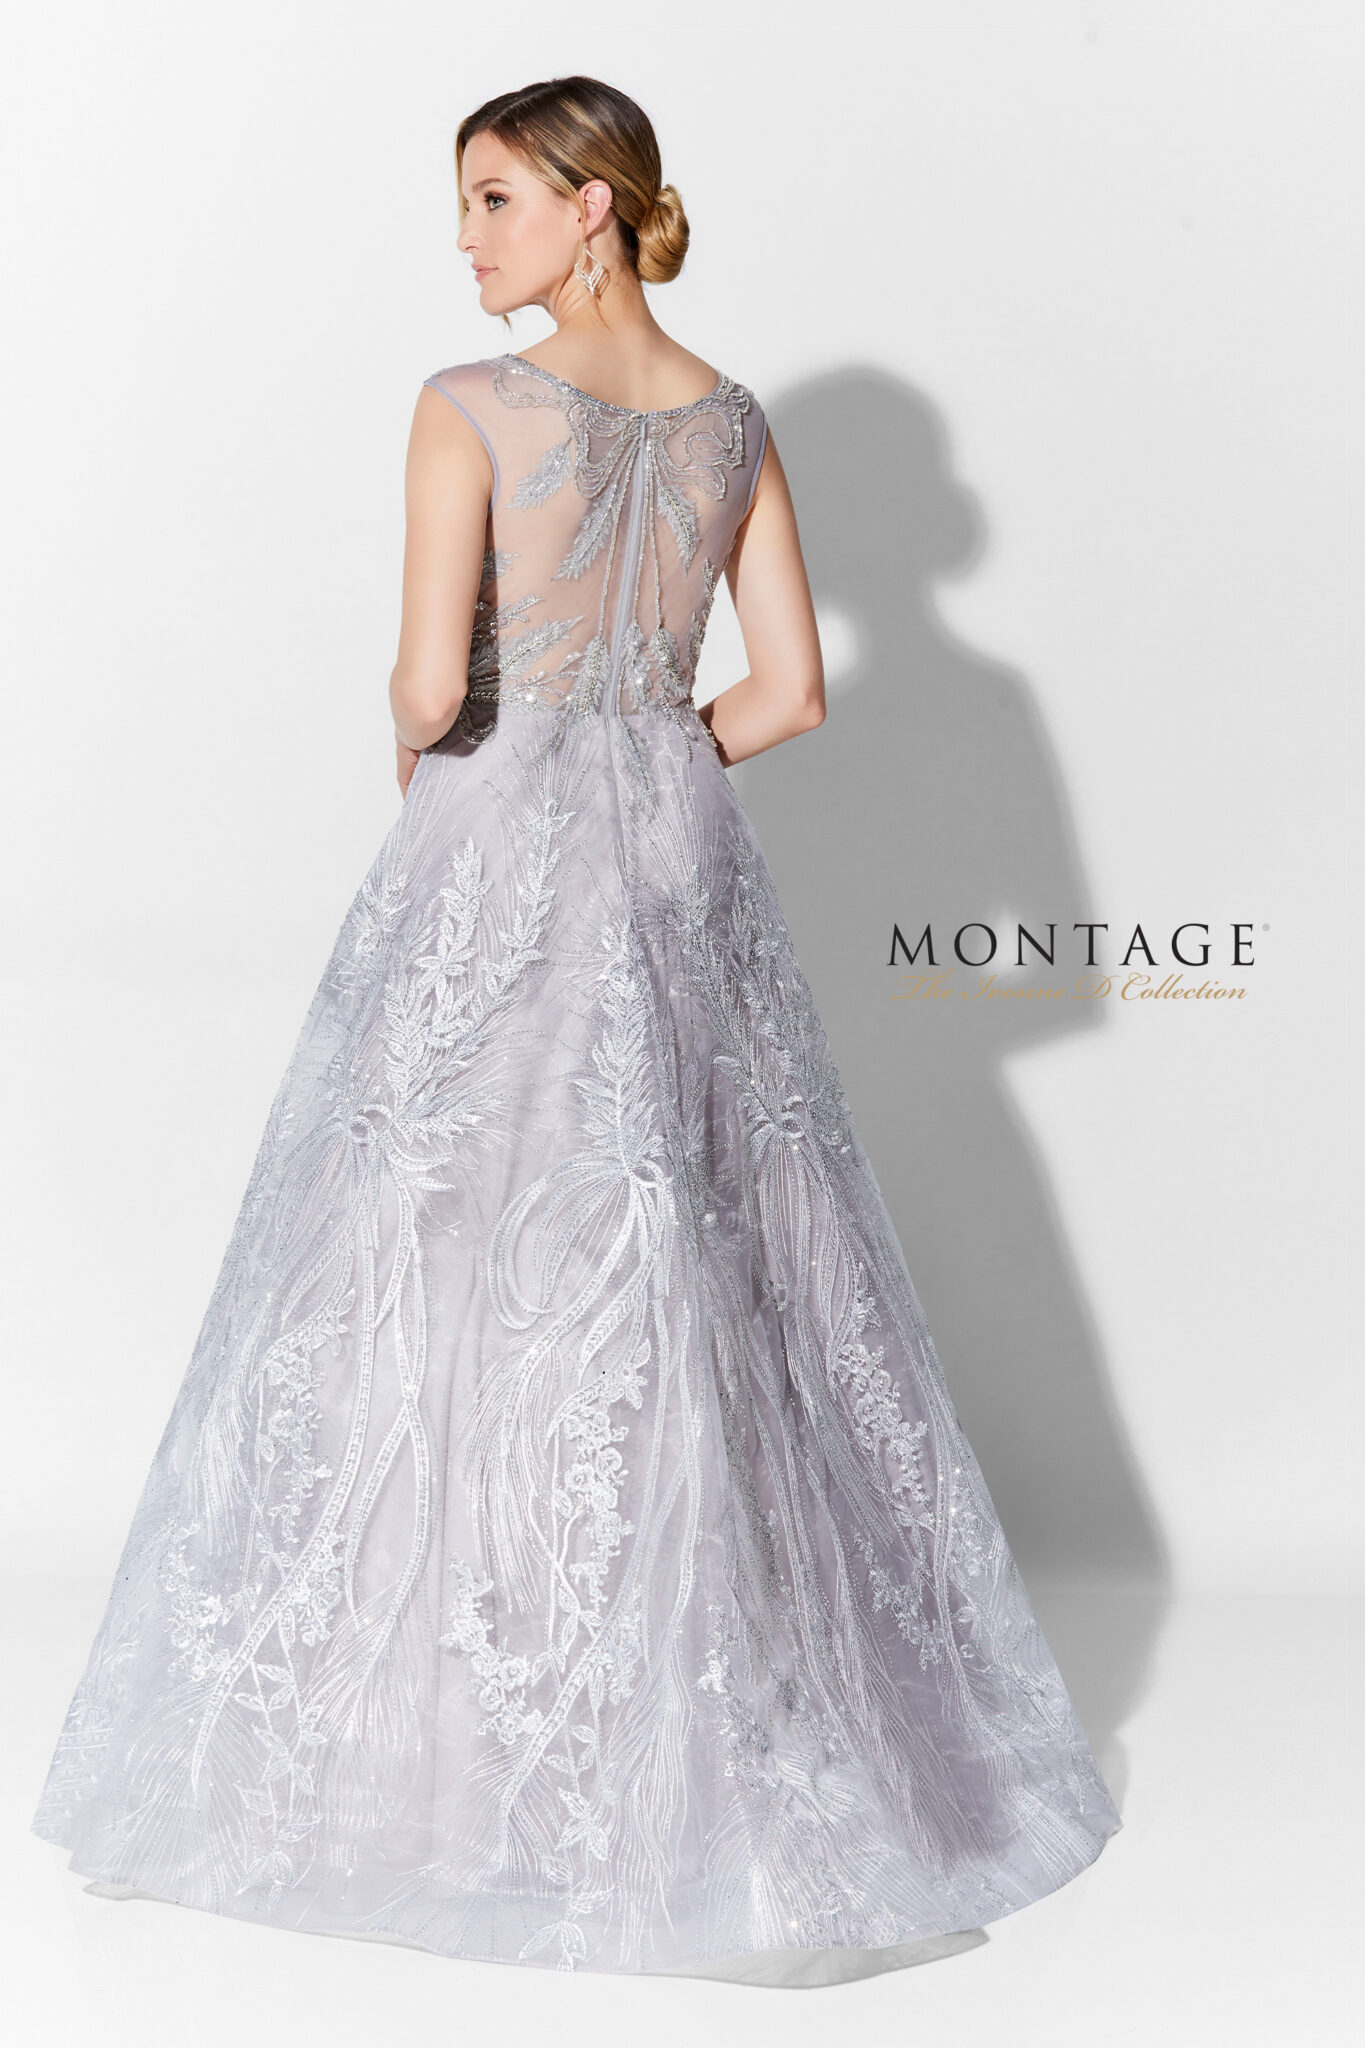 Ivonne D Wedding Evening Dress and Gown Collection | Bridal Reflections